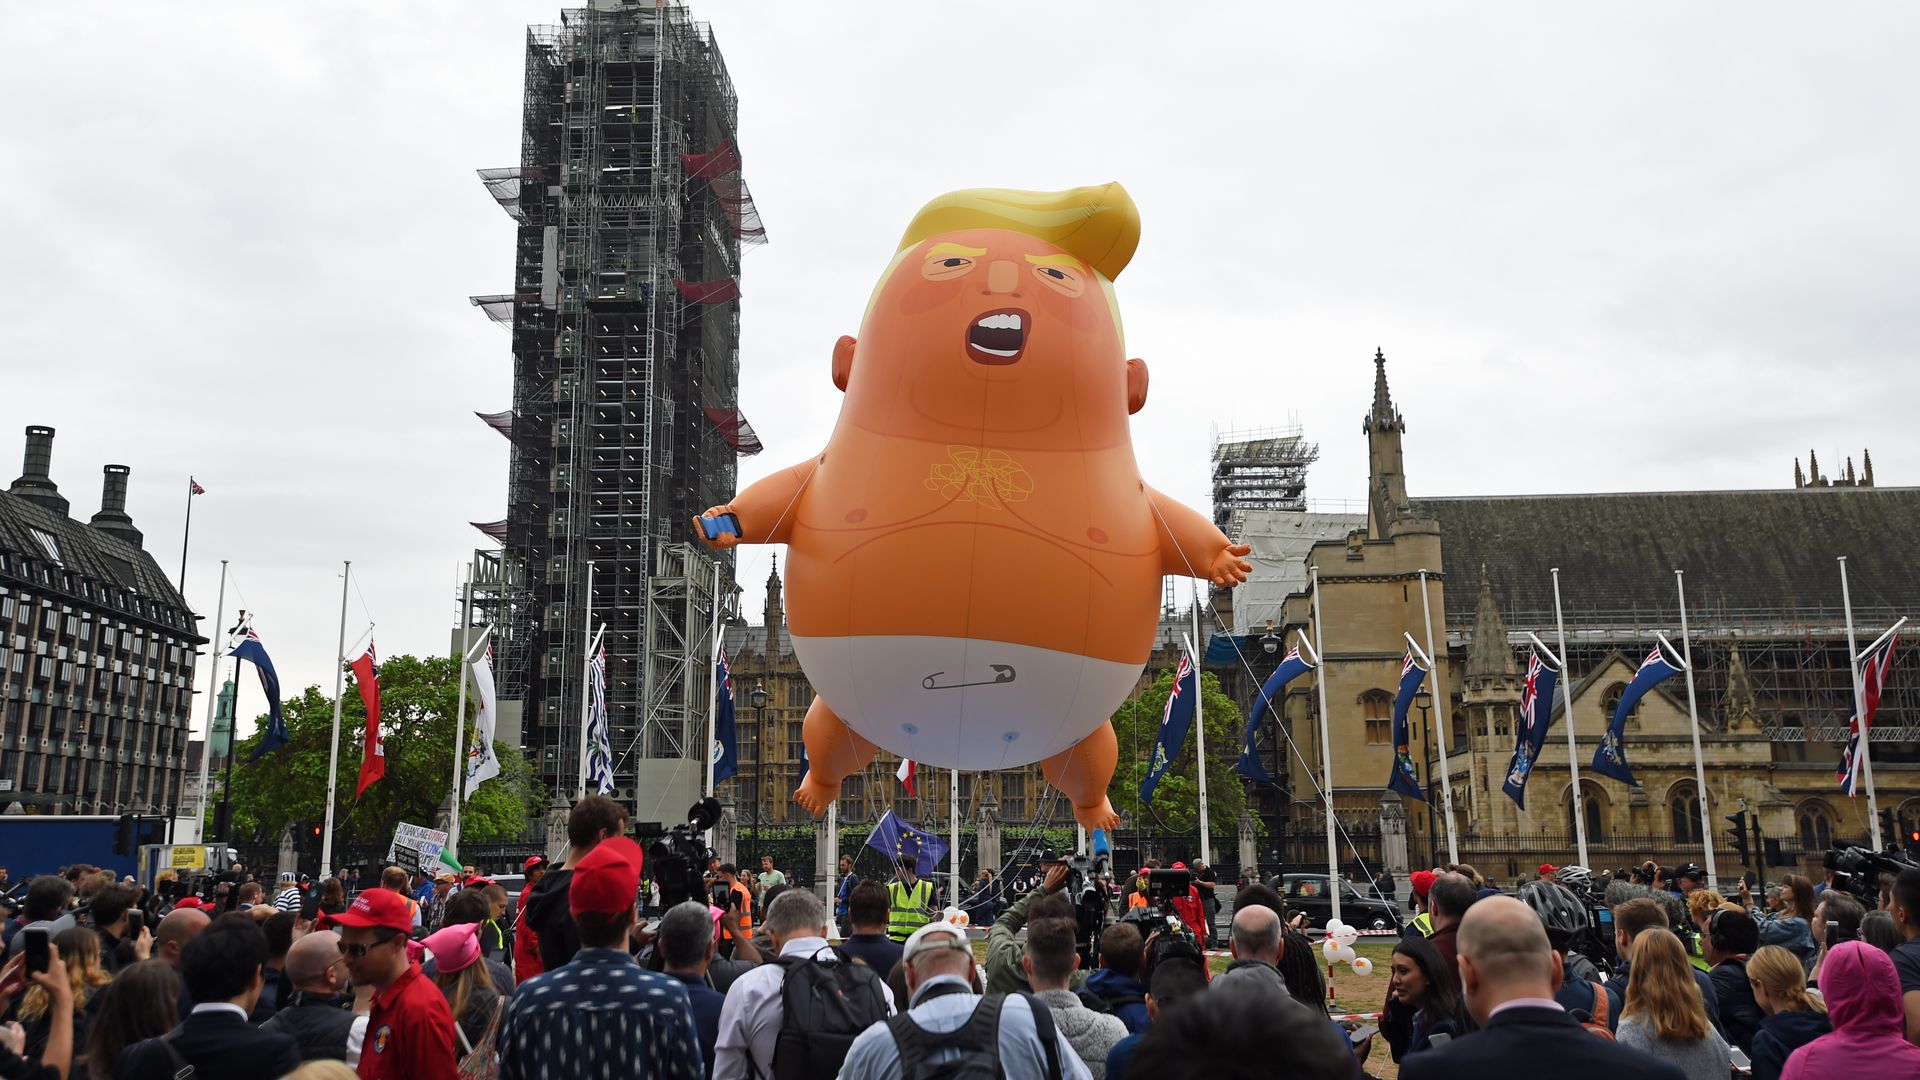 The Donald Trump baby balloon set up in Parliament Square, London.